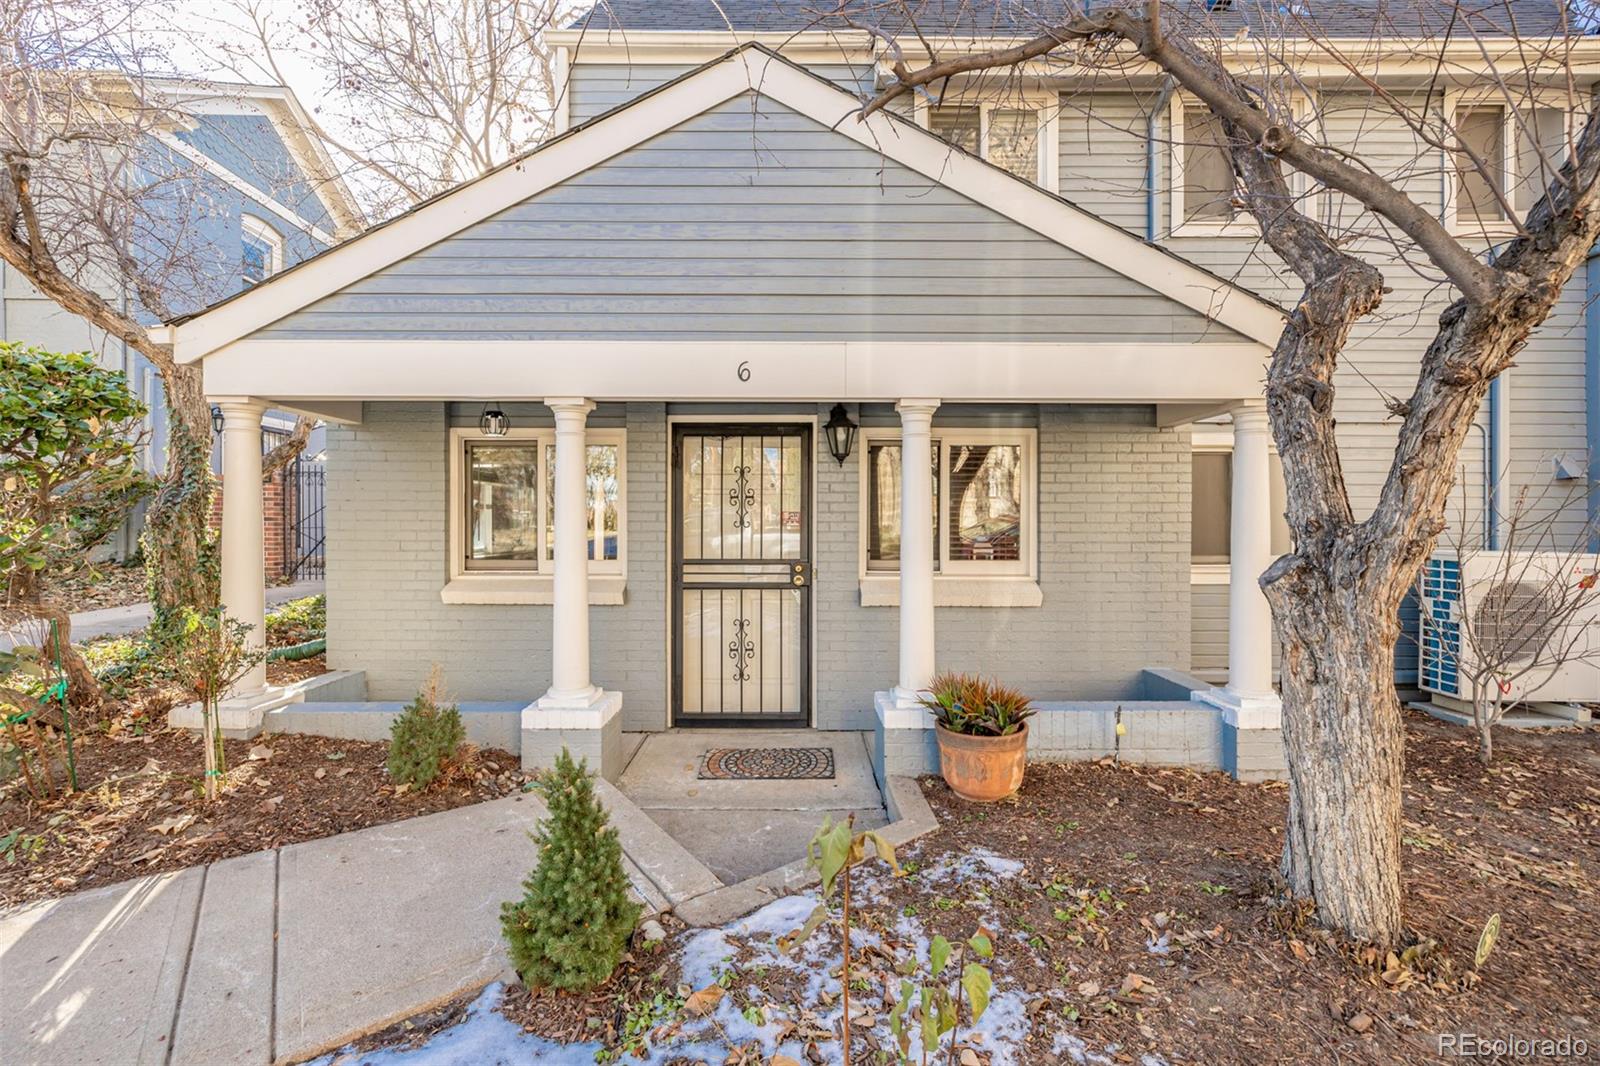 101 s downing street, denver sold home. Closed on 2024-02-05 for $570,000.